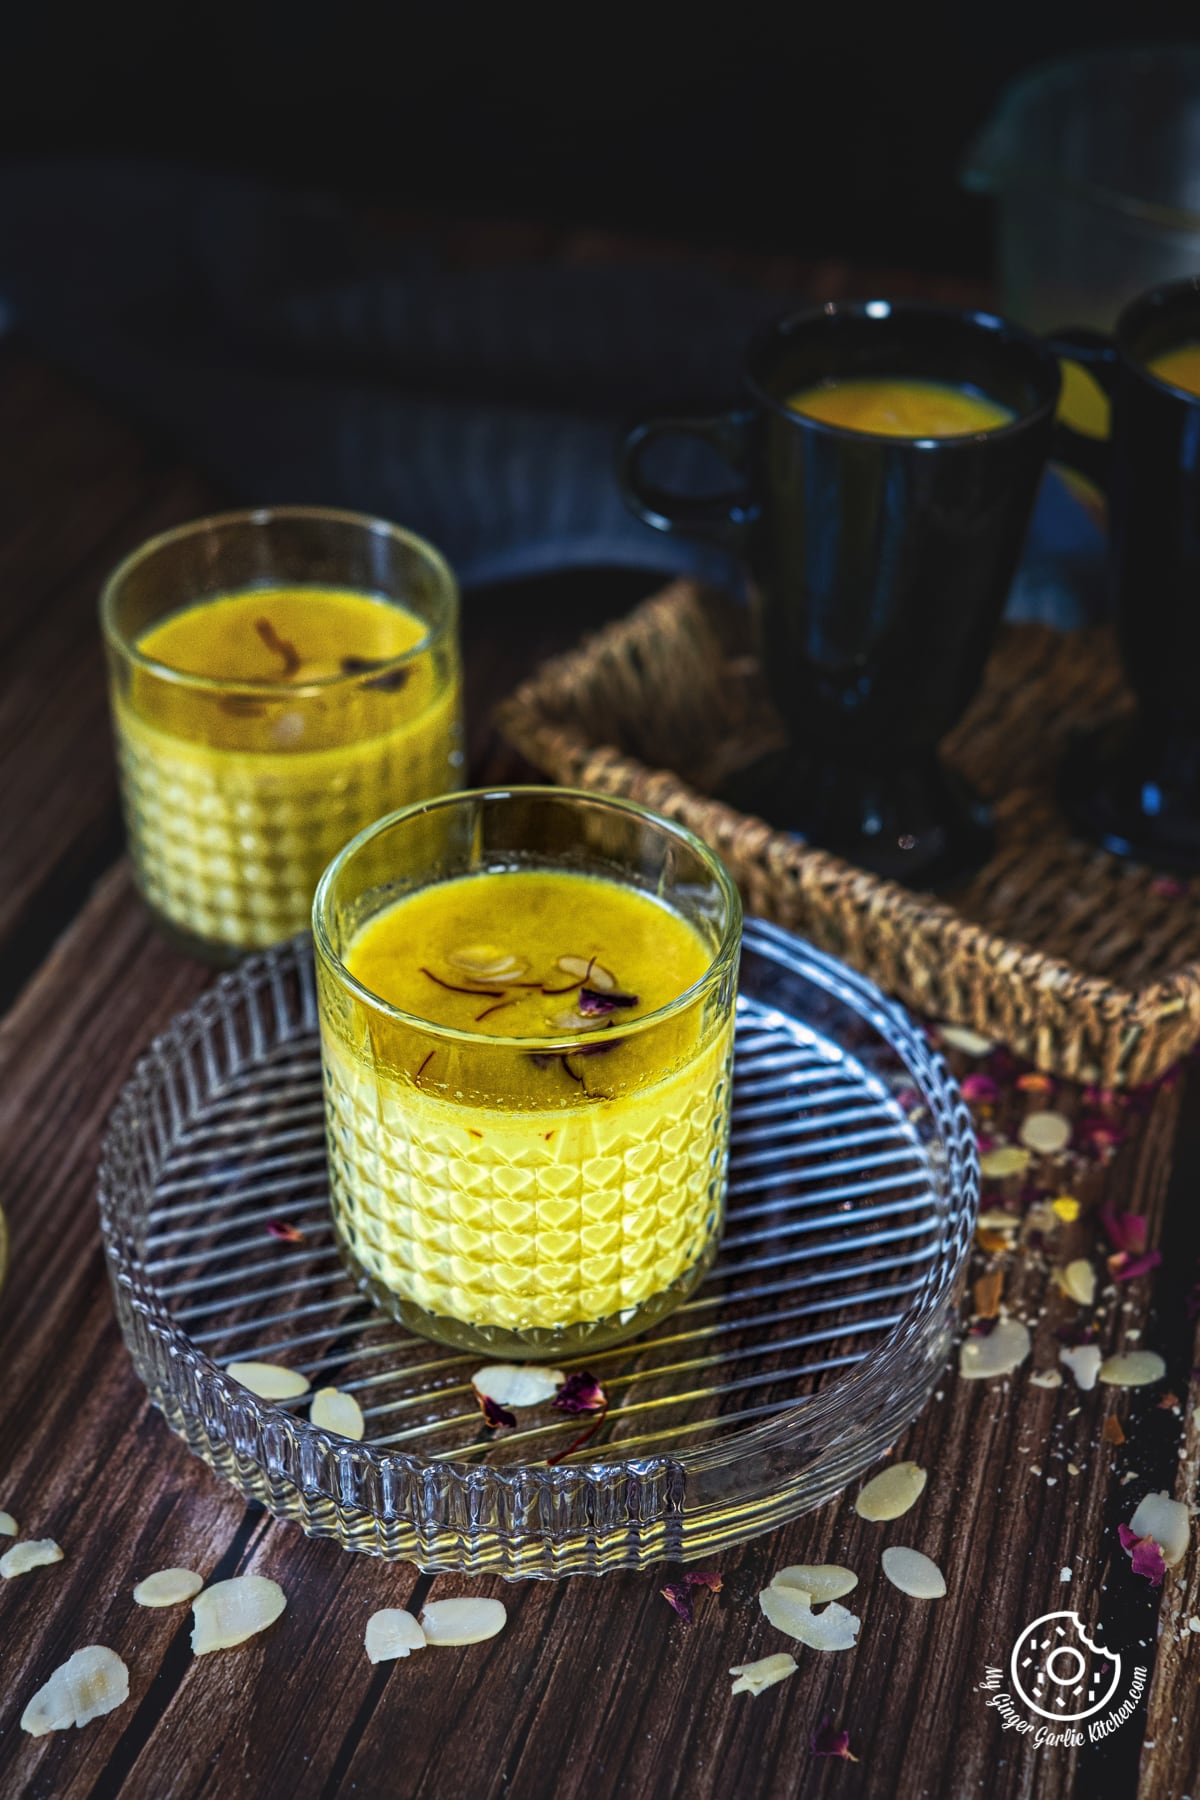 saffron milk in a transparent glass and one more glass in the background